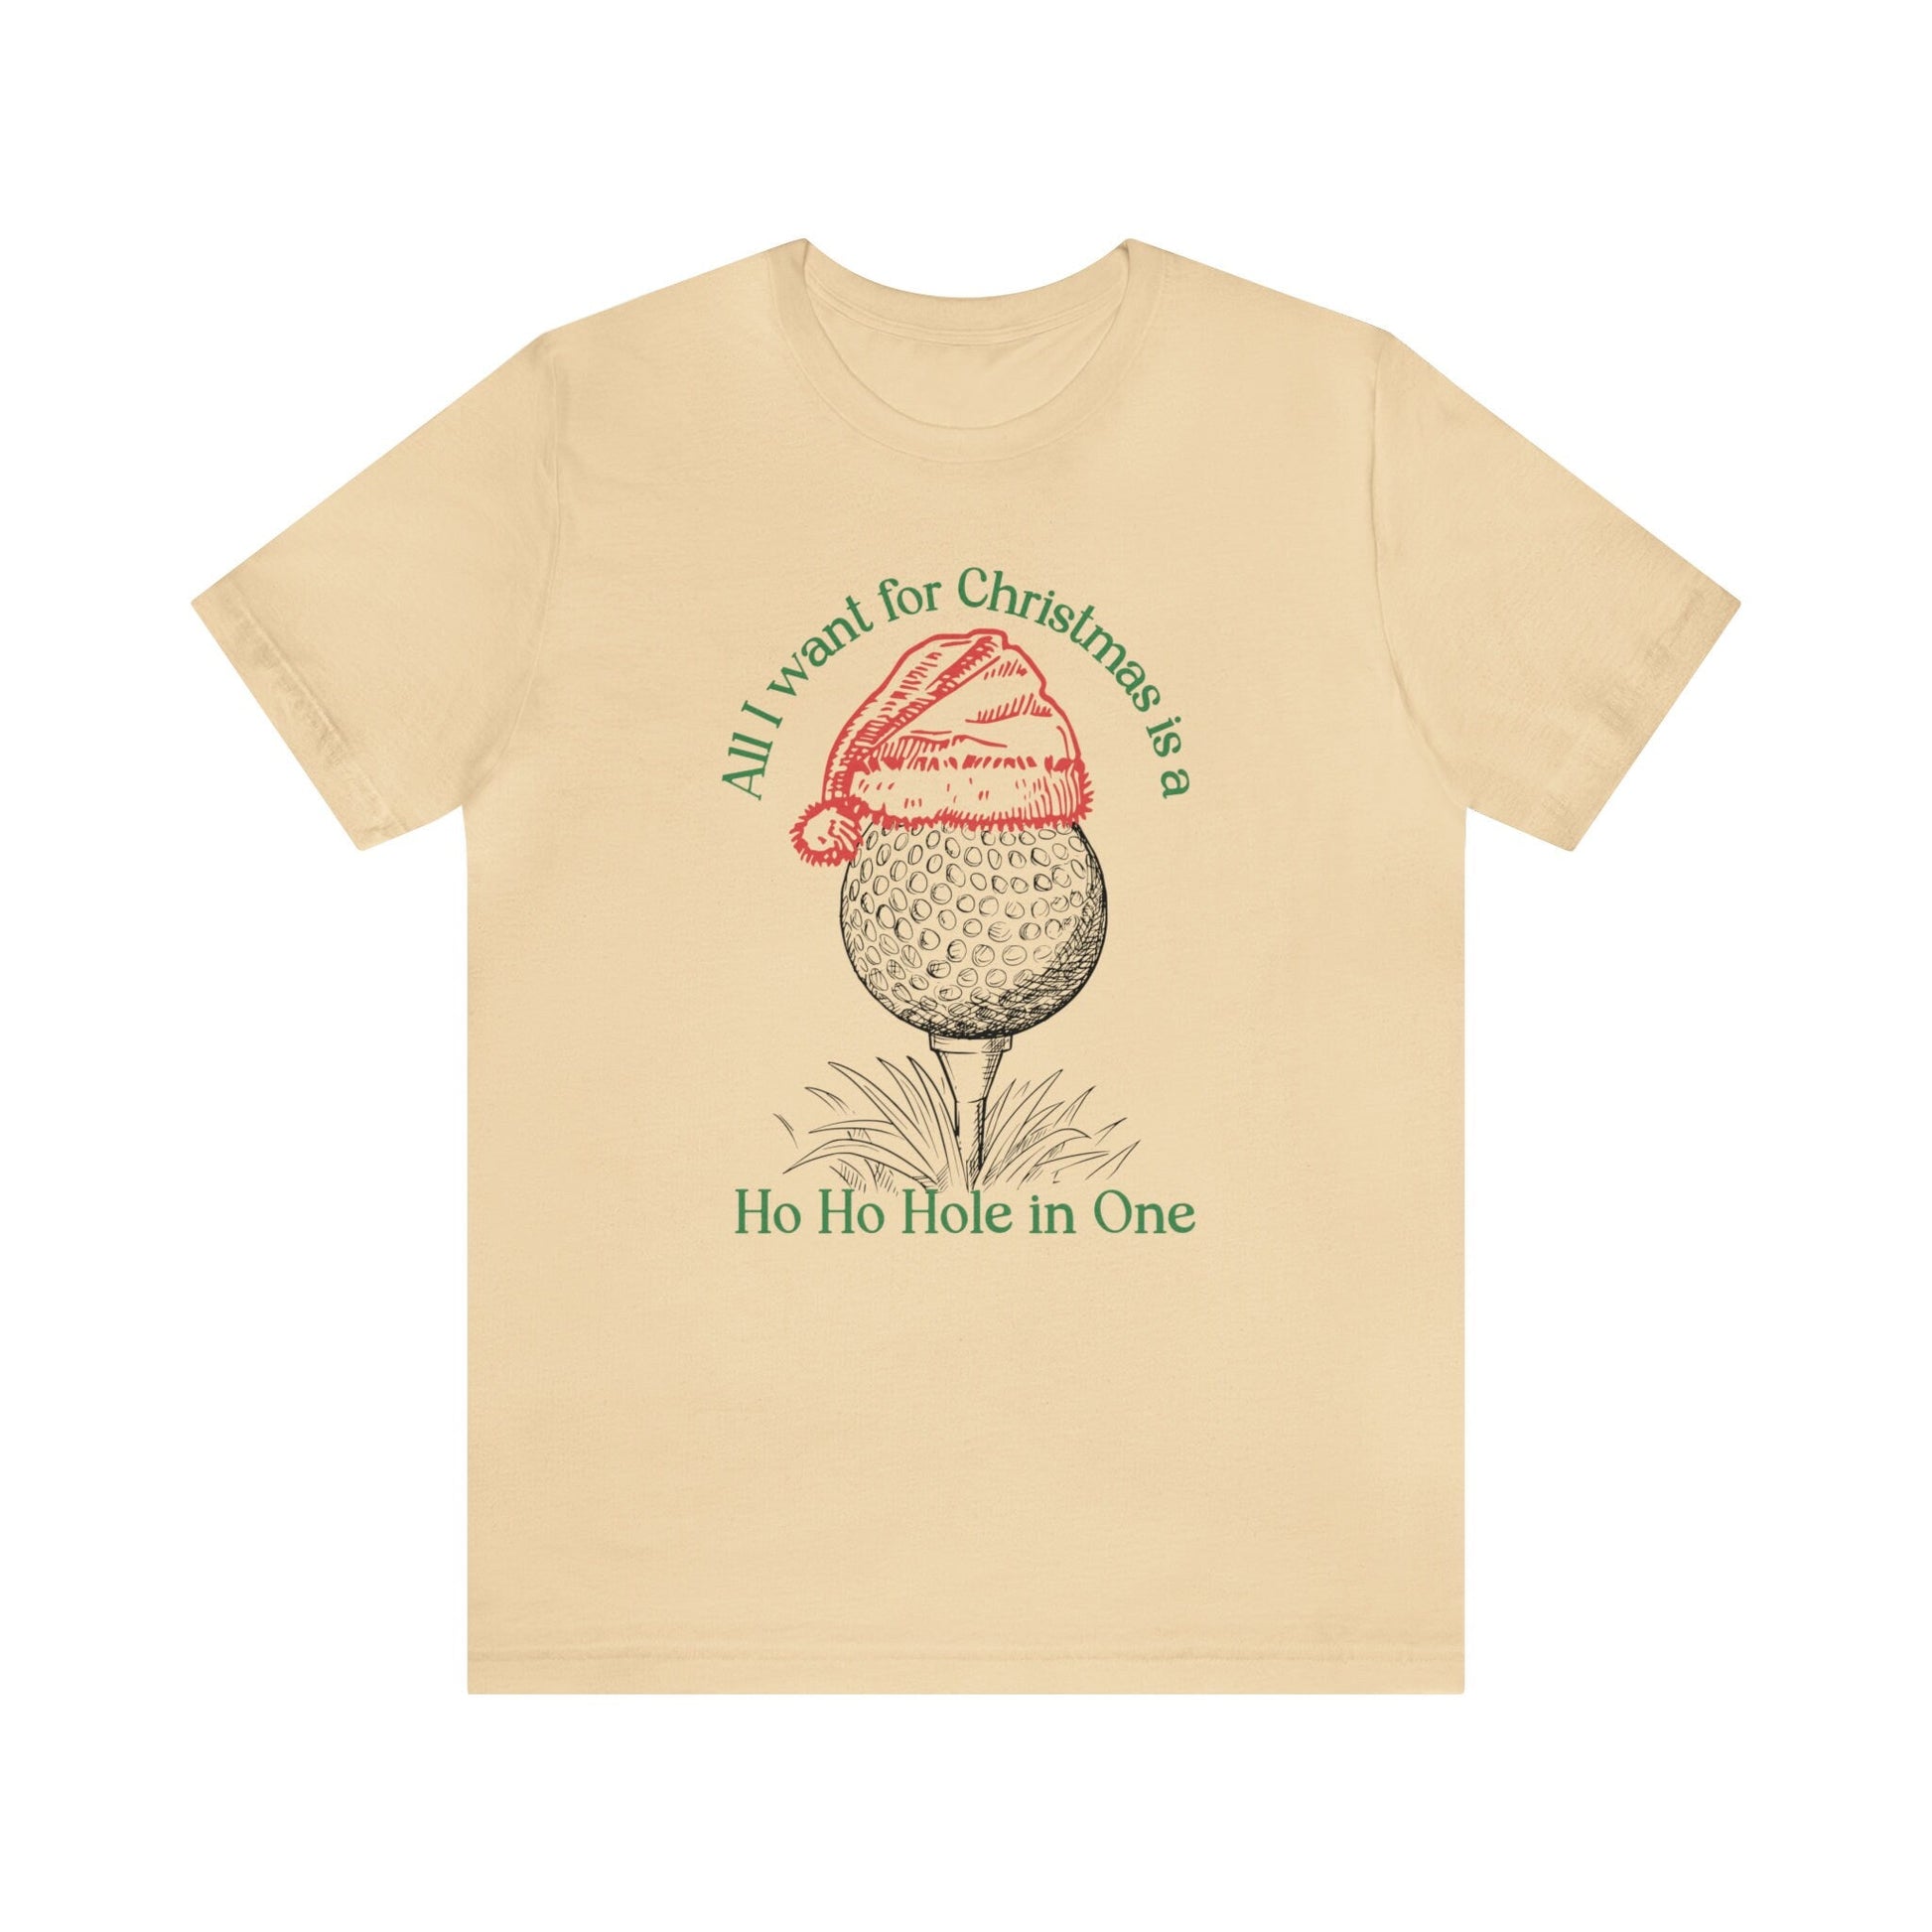 All I Want For Christmas Is A Ho Ho Hole In One Tshirt, Xmas Golf Tee, Gift For Golfer, Present For Dad Husband Brother